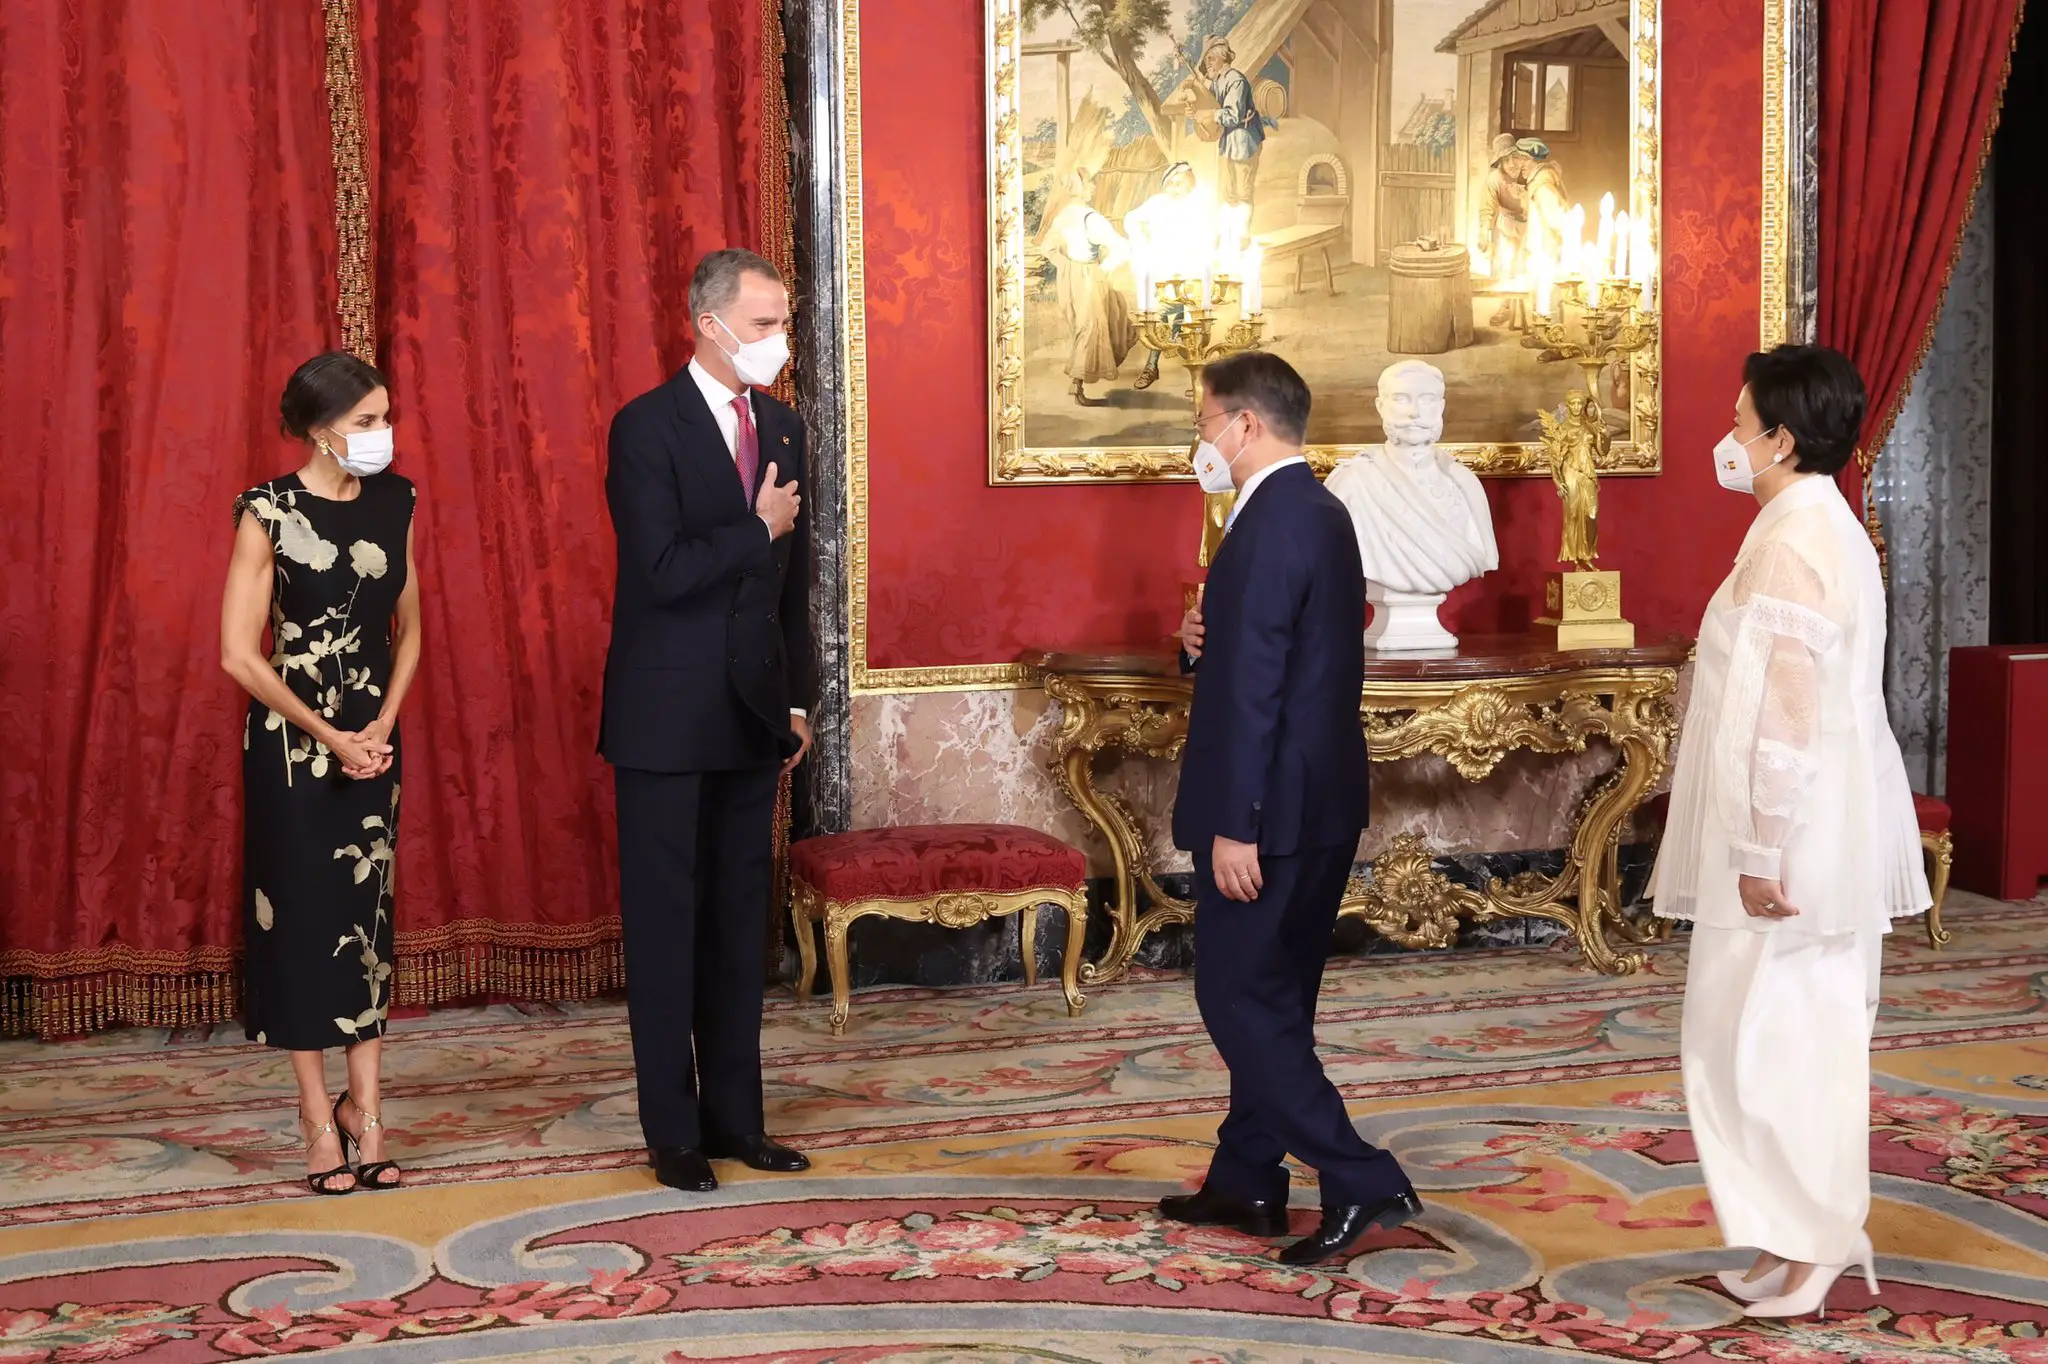 Queen Letizia wore her Dries Van Noten black printed dress that she first wore at the “Francisco Cerecedo” Journalism awards in November 2019.